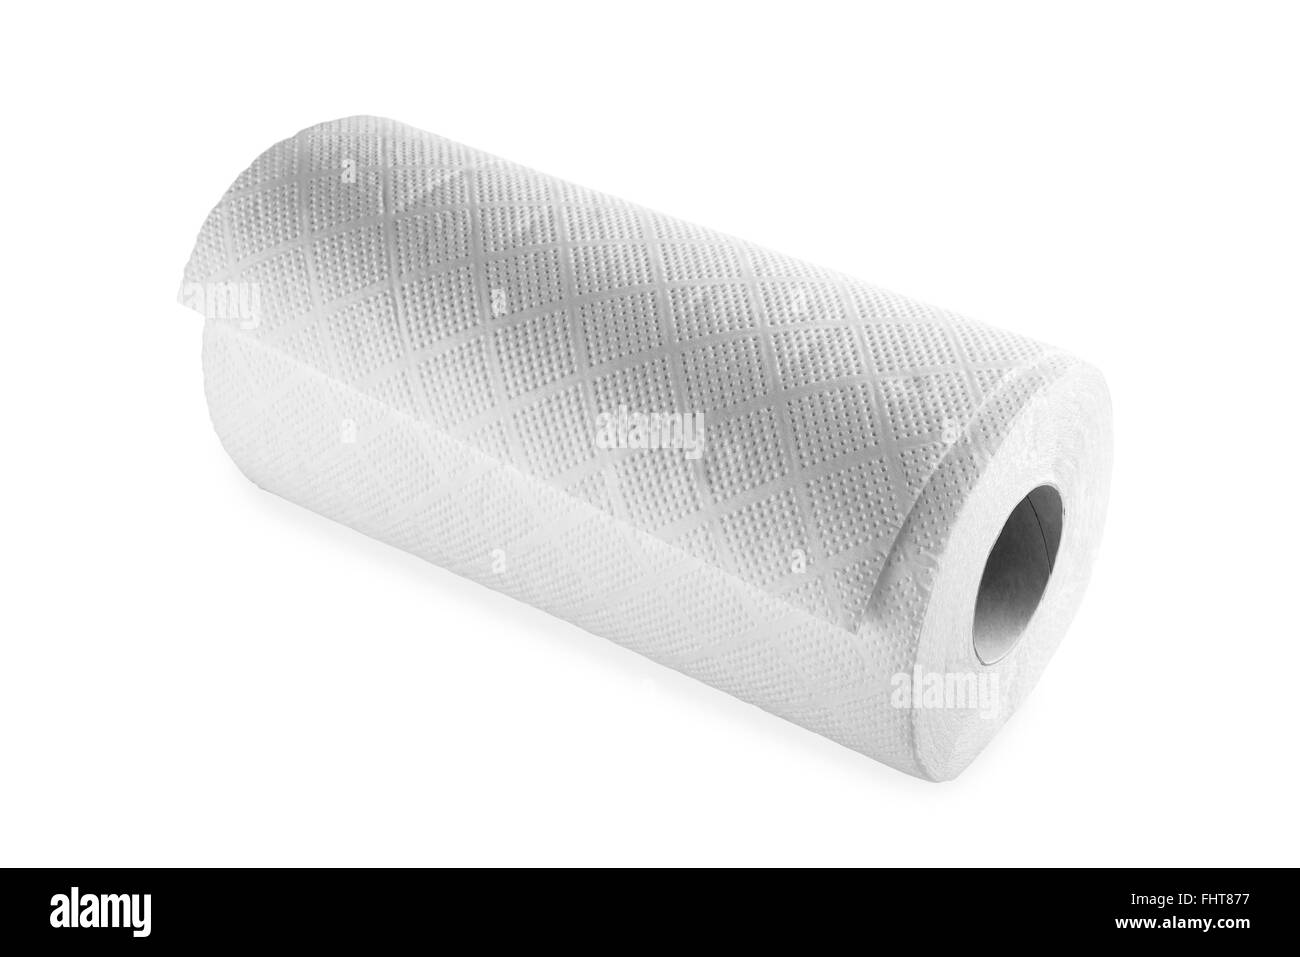 Cleaning paper towel roll isolated on white background Stock Photo